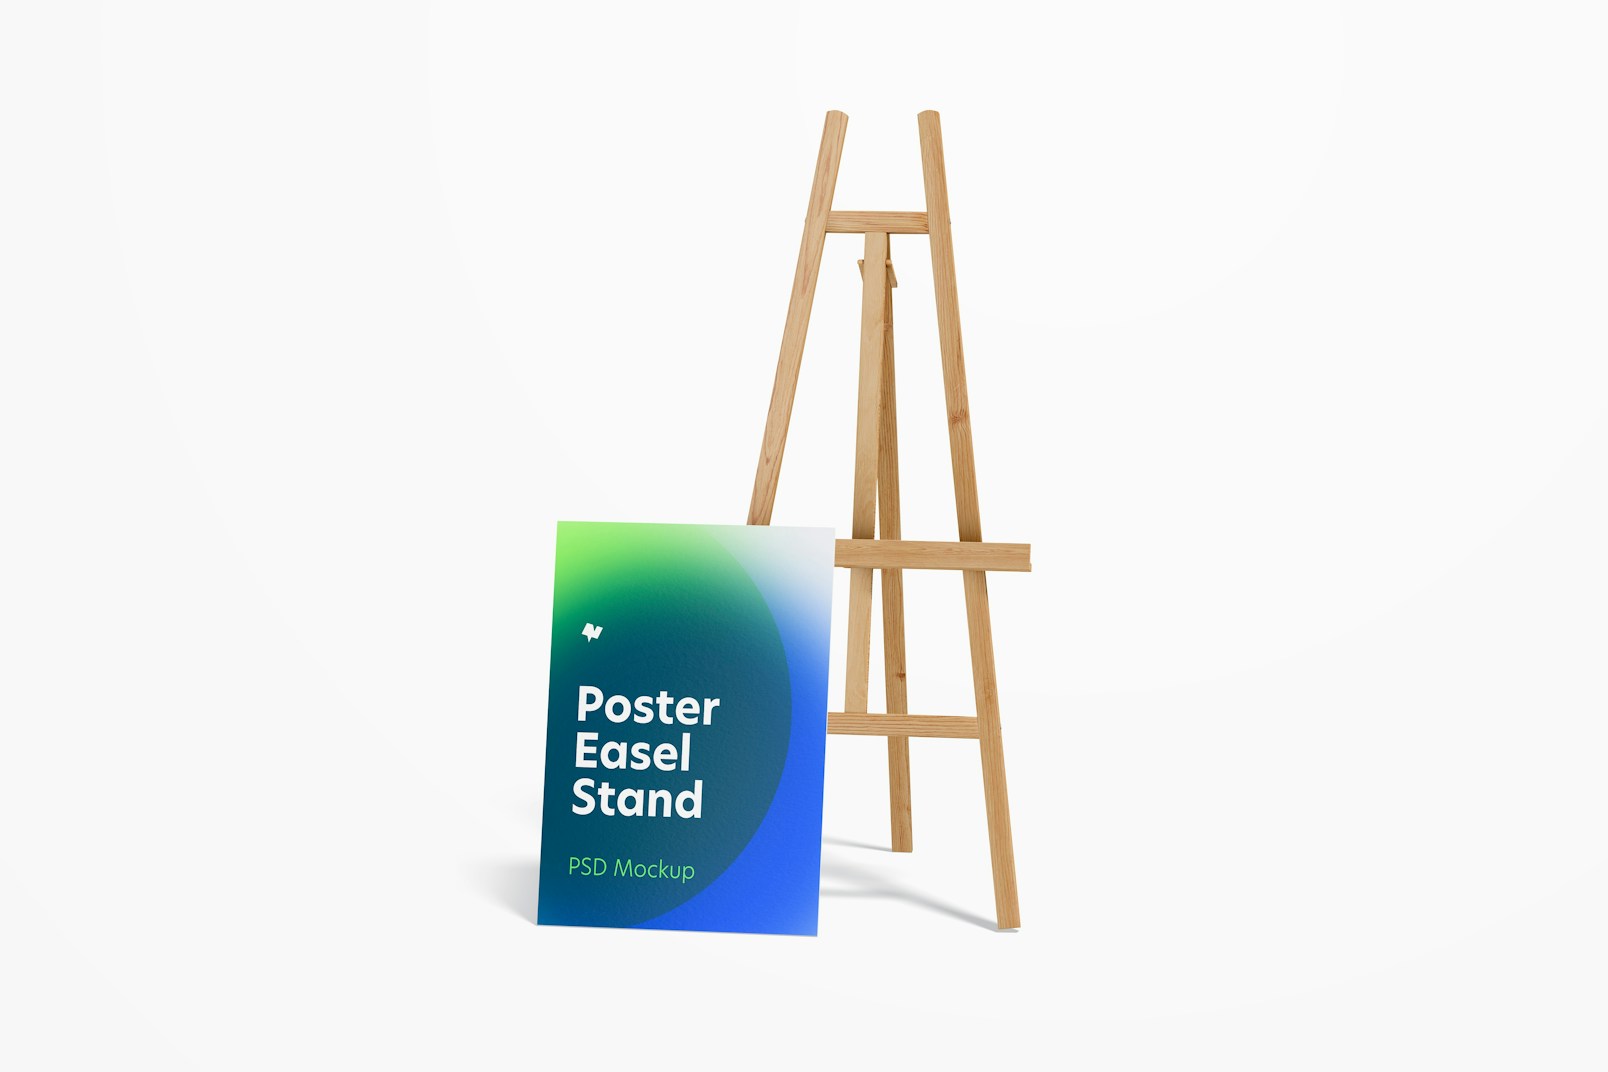 Poster Easel Stand Mockup